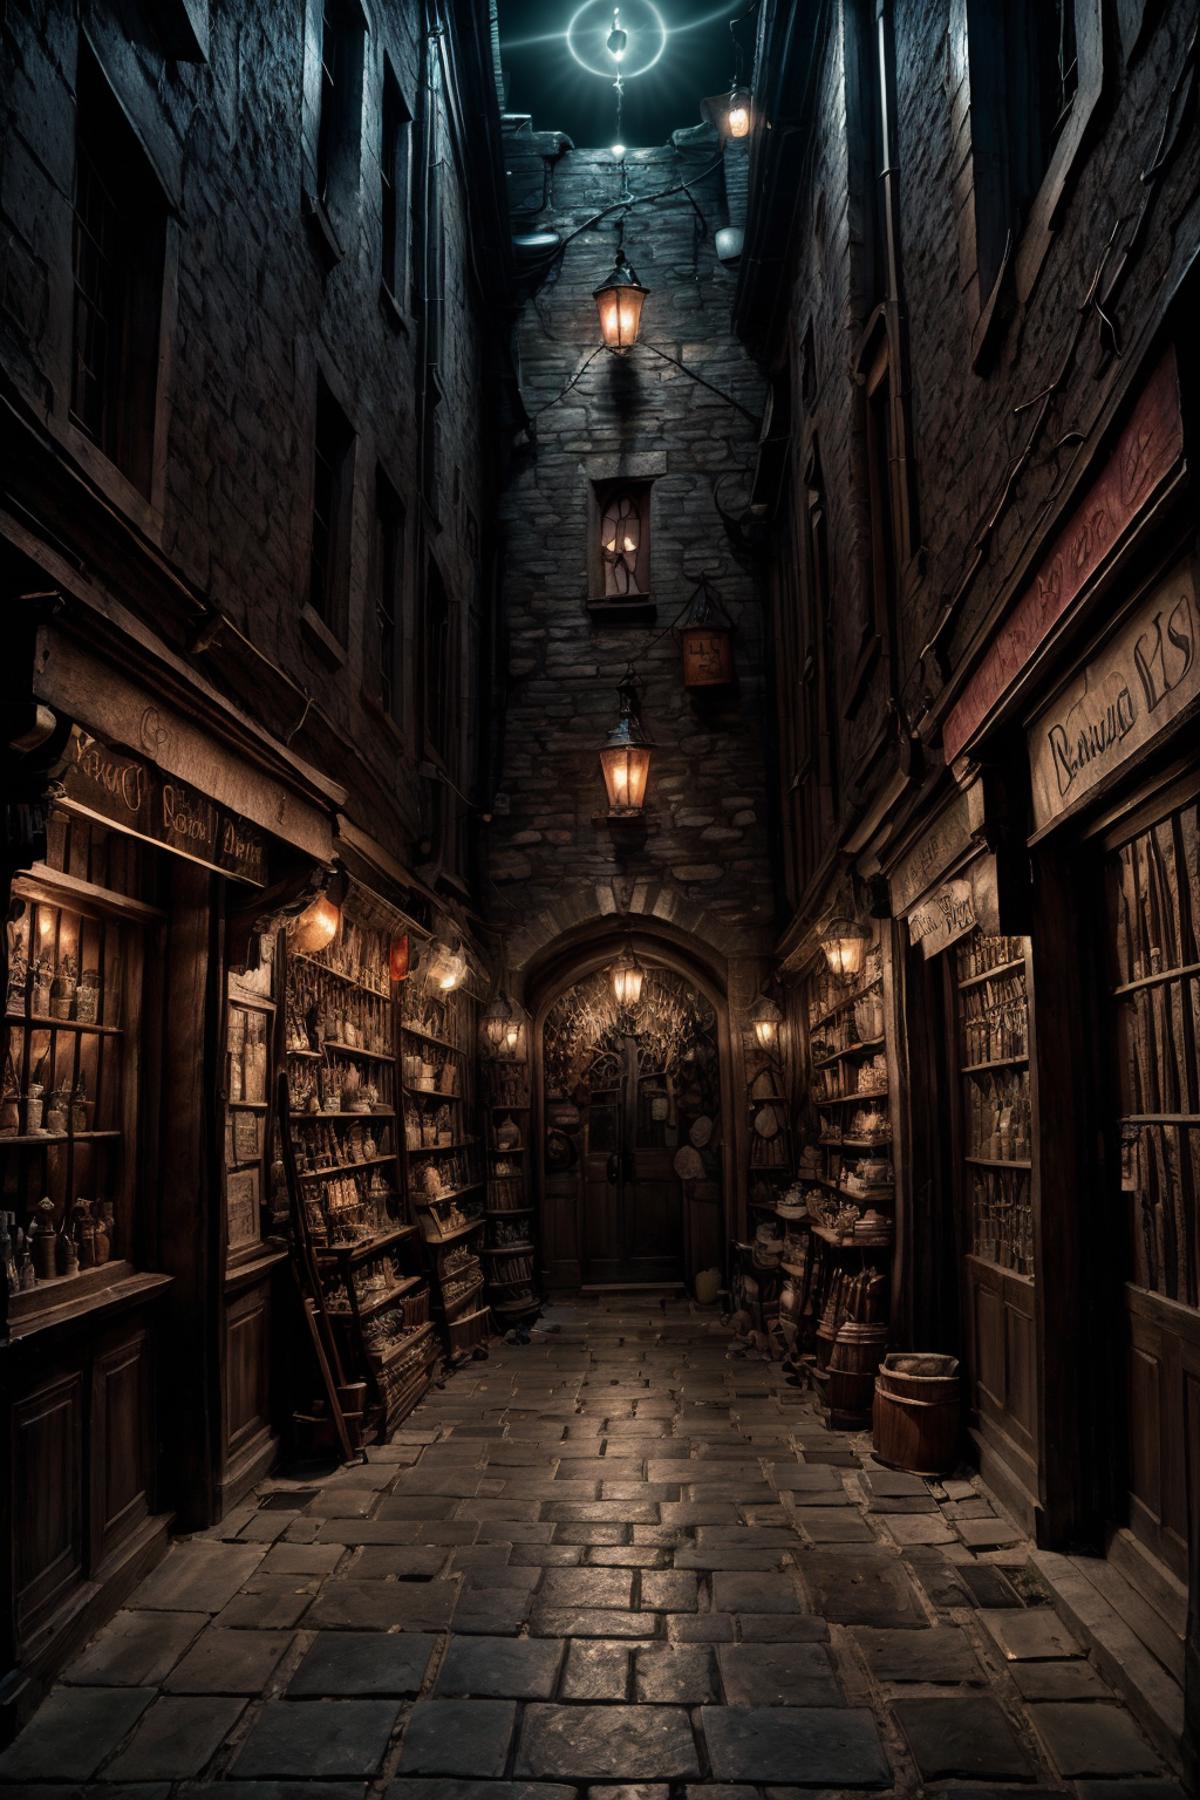 The narrow alleyway filled with bookshelves and lit lights.